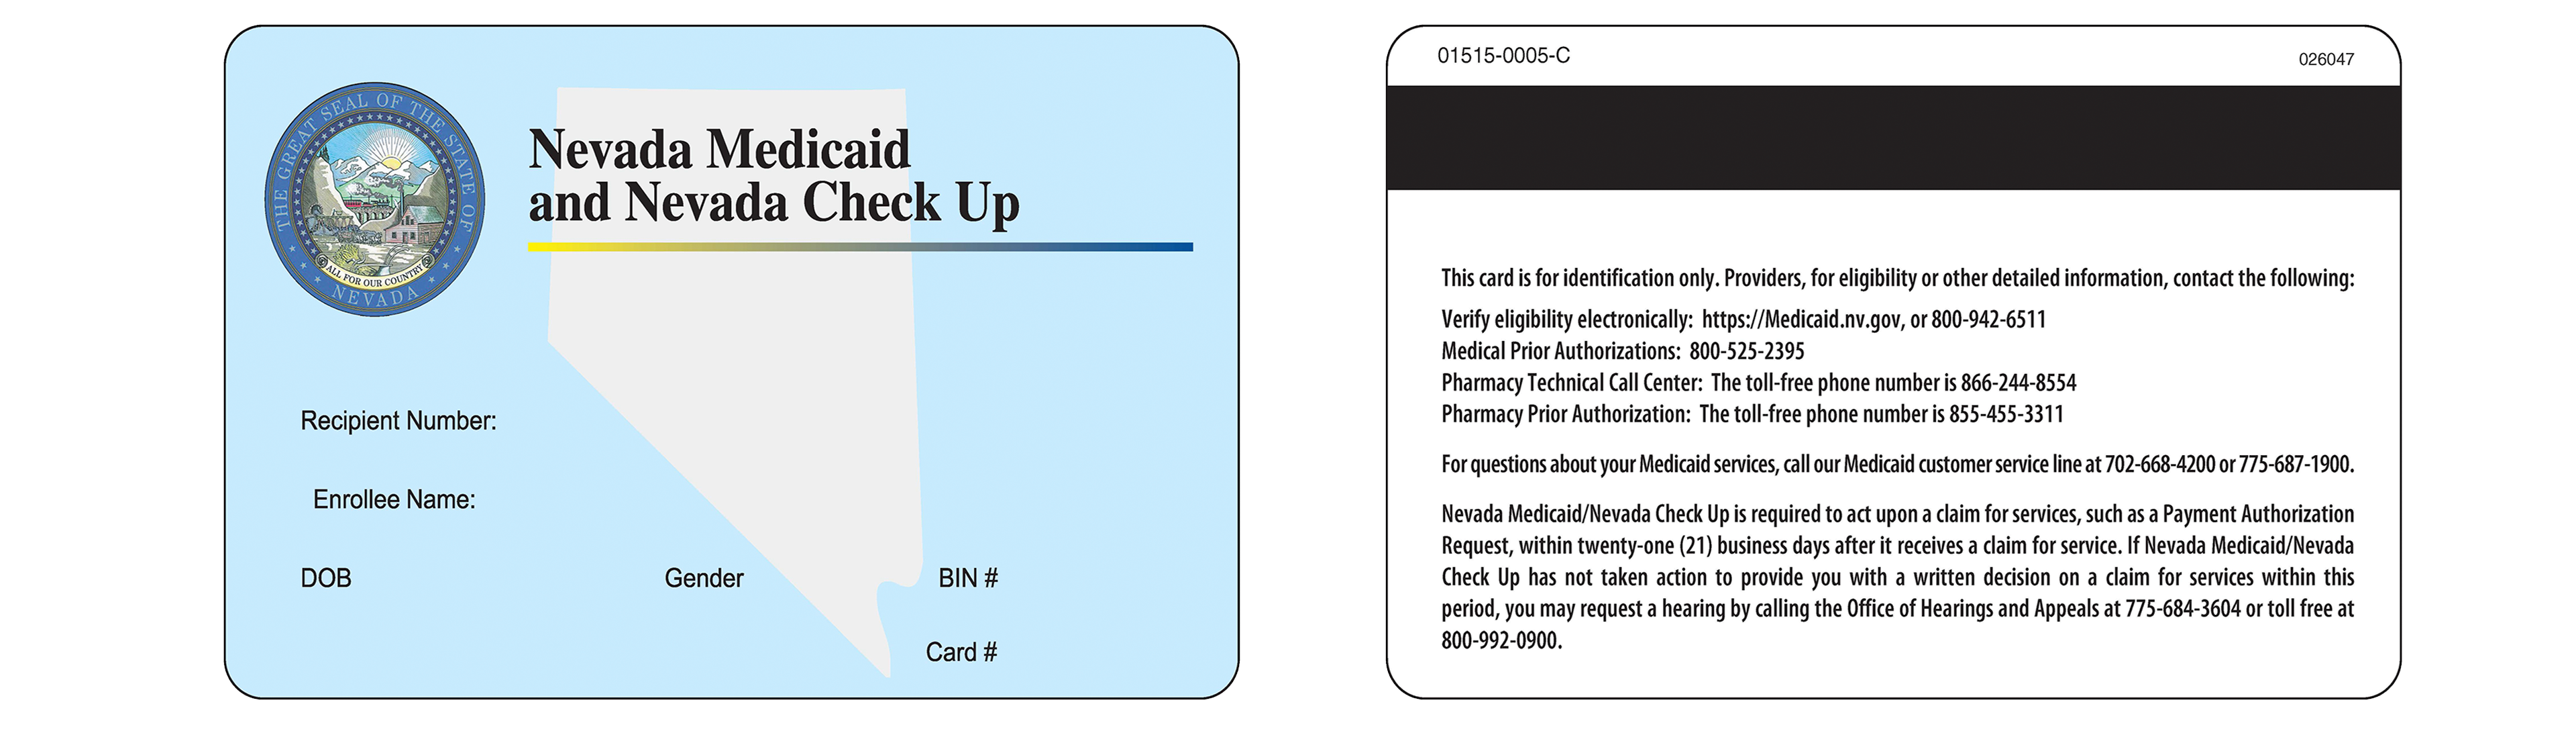 State Medicaid ID card example